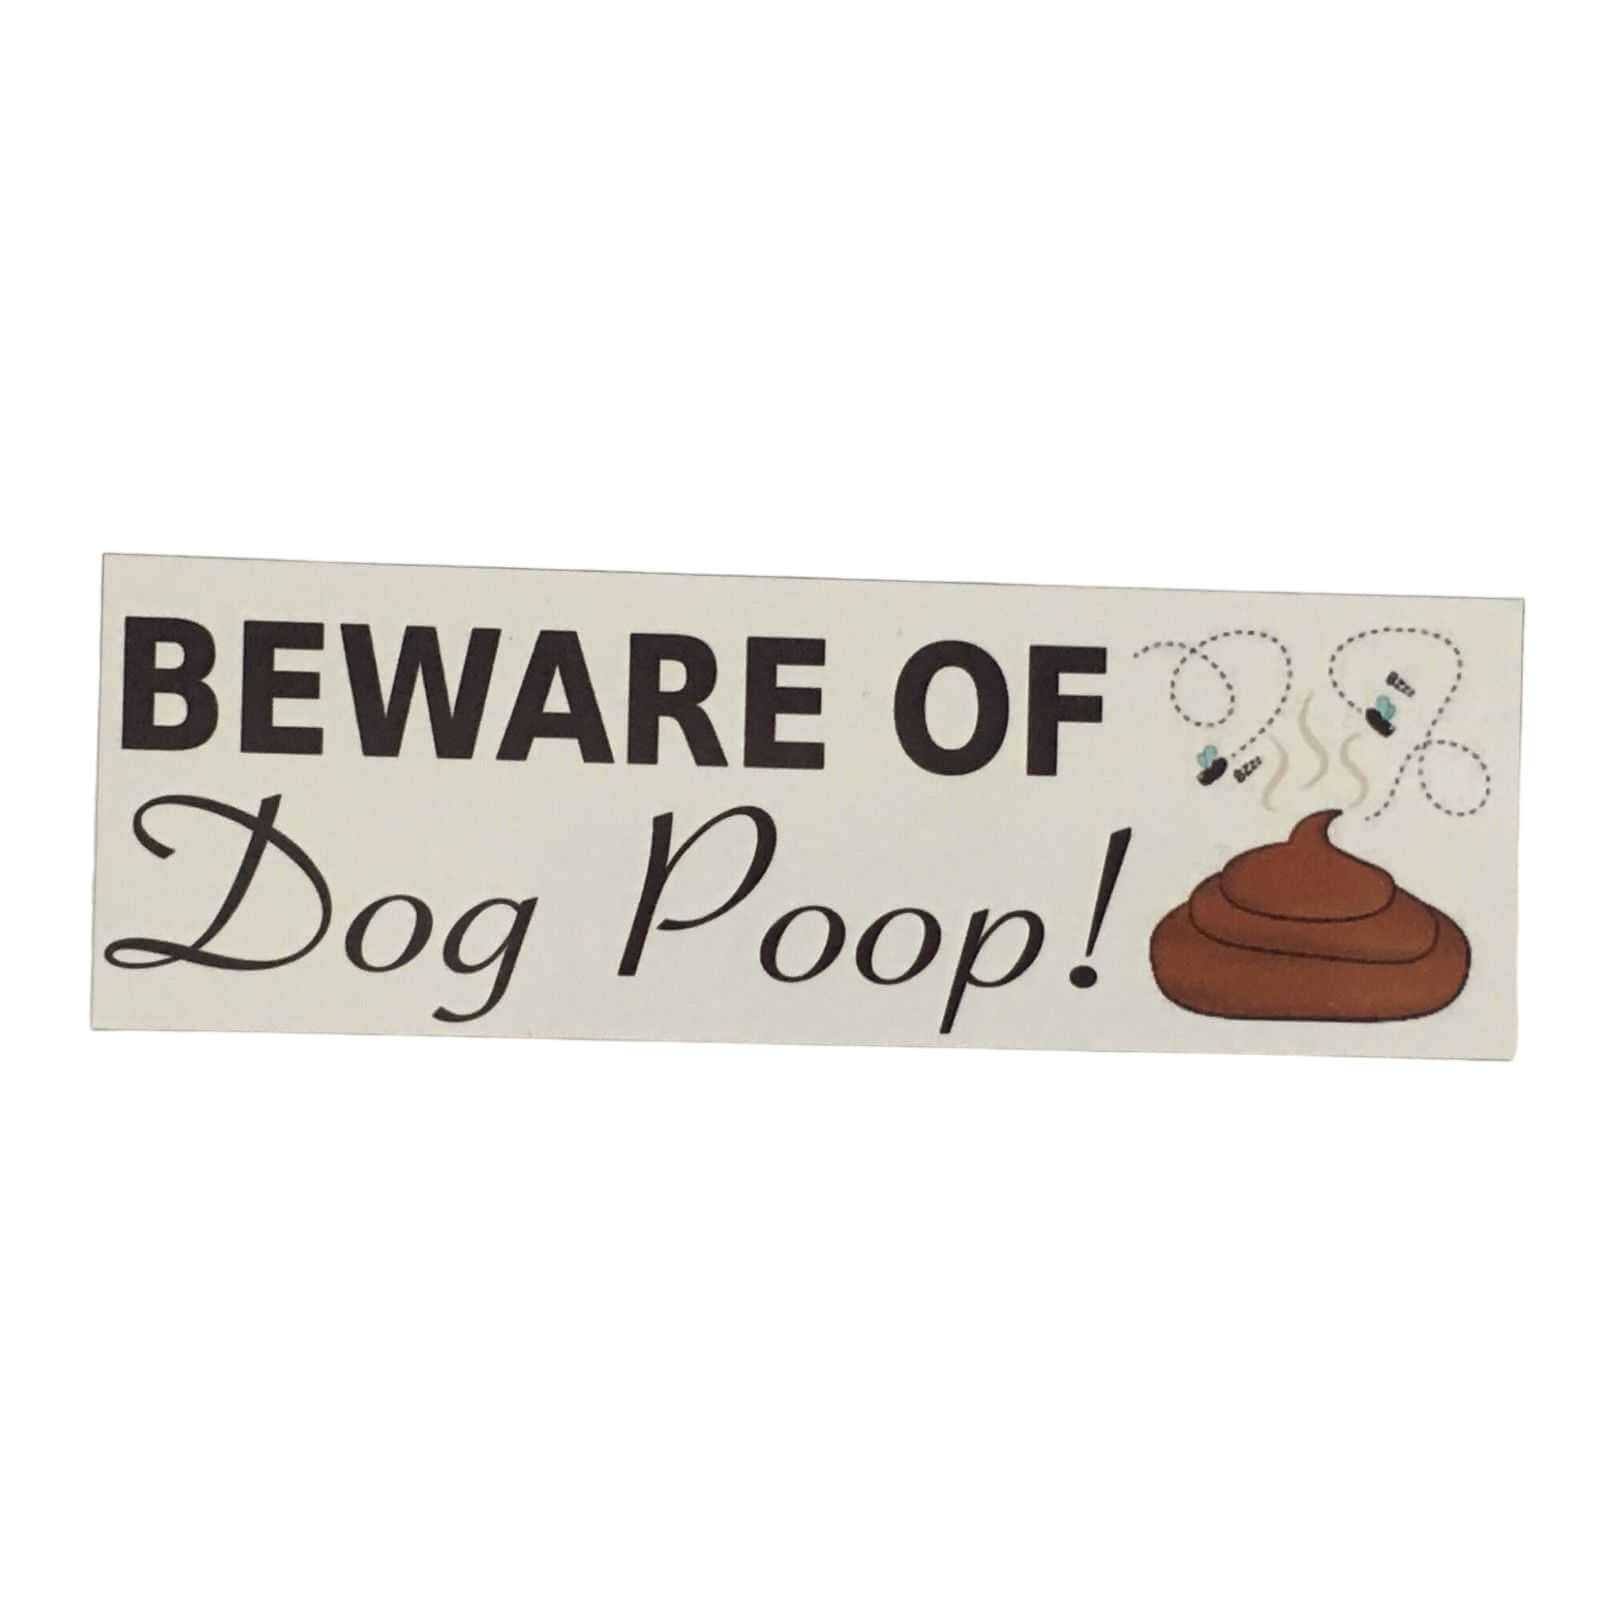 Beware Of Dog Poop Poo Sign - The Renmy Store Homewares & Gifts 